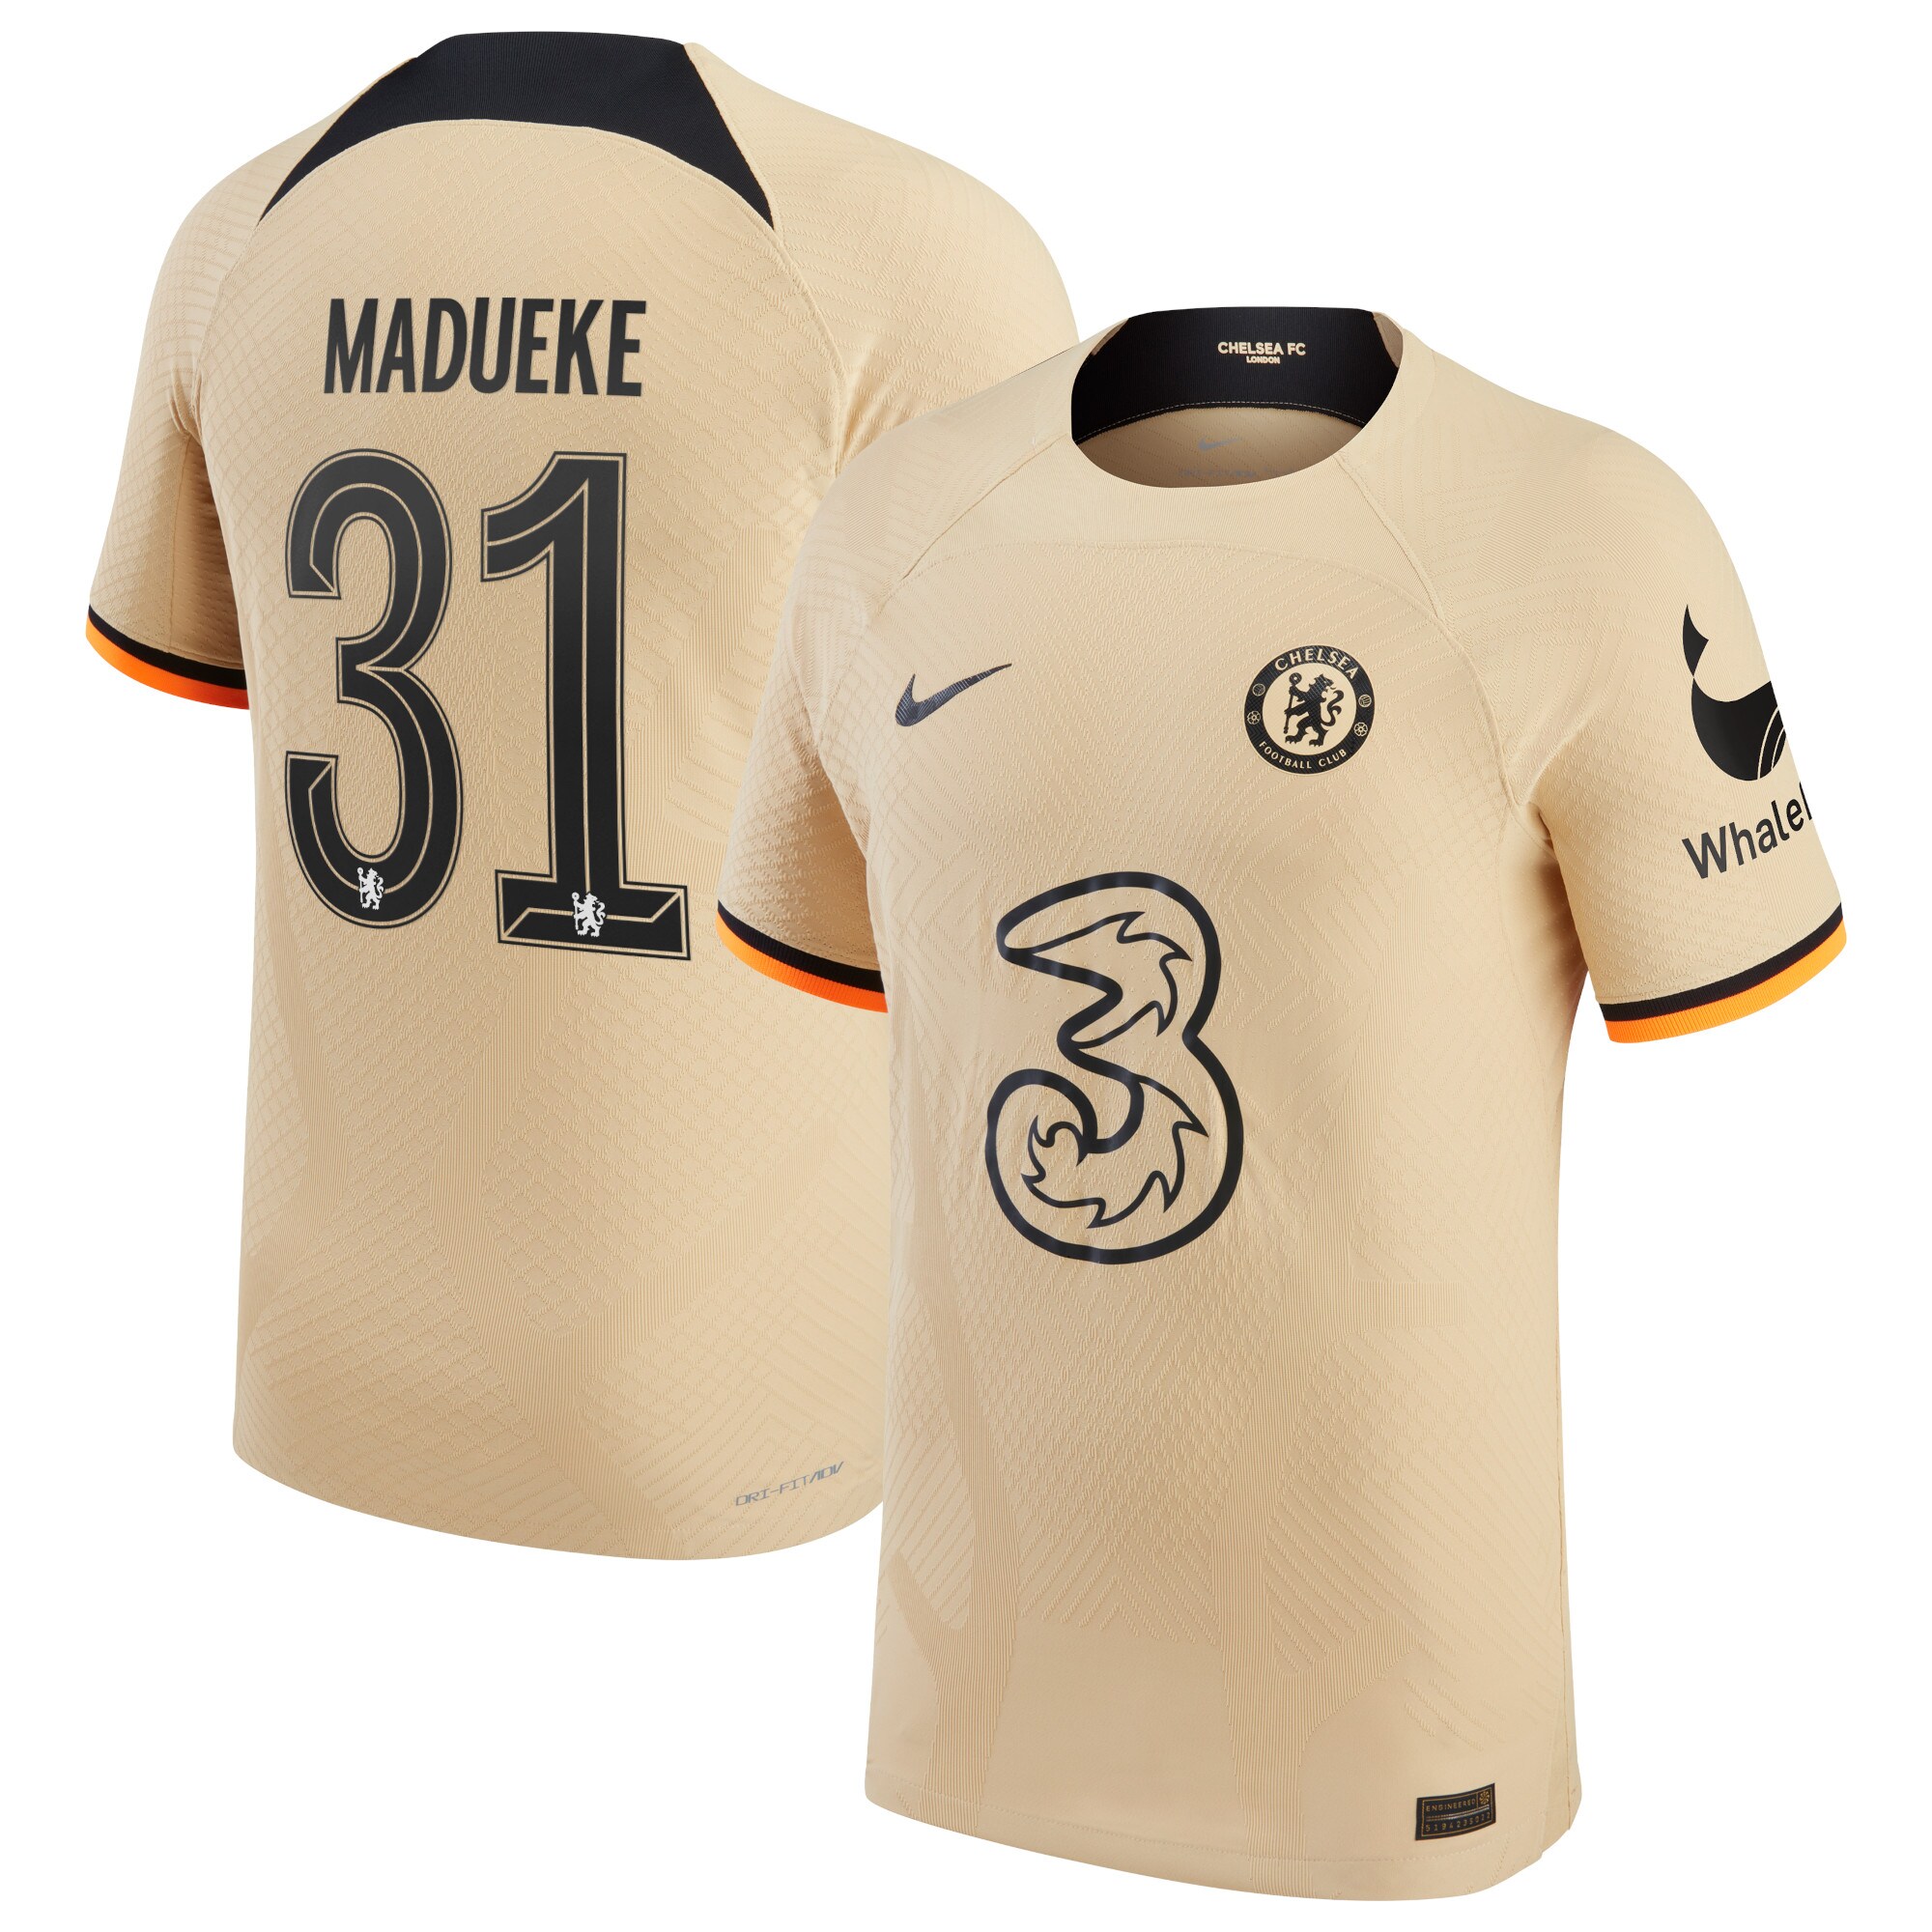 Chelsea Cup Third Vapor Match Shirt 2022-23 with Madueke 31 printing